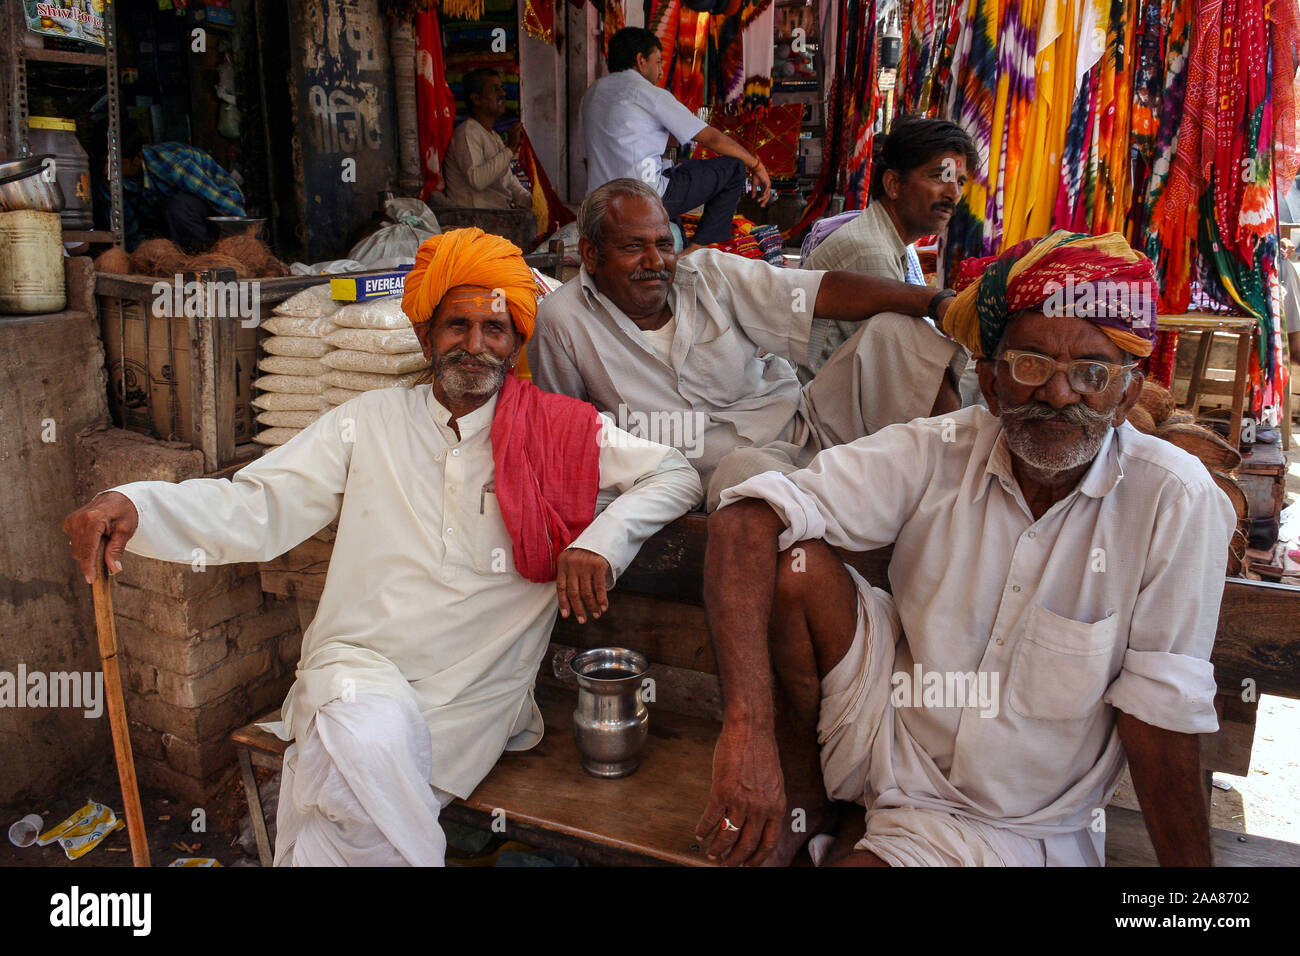 Bikaner, Rajasthan, India: four Indian men happy smile while sitting in front of a textile shop Stock Photo